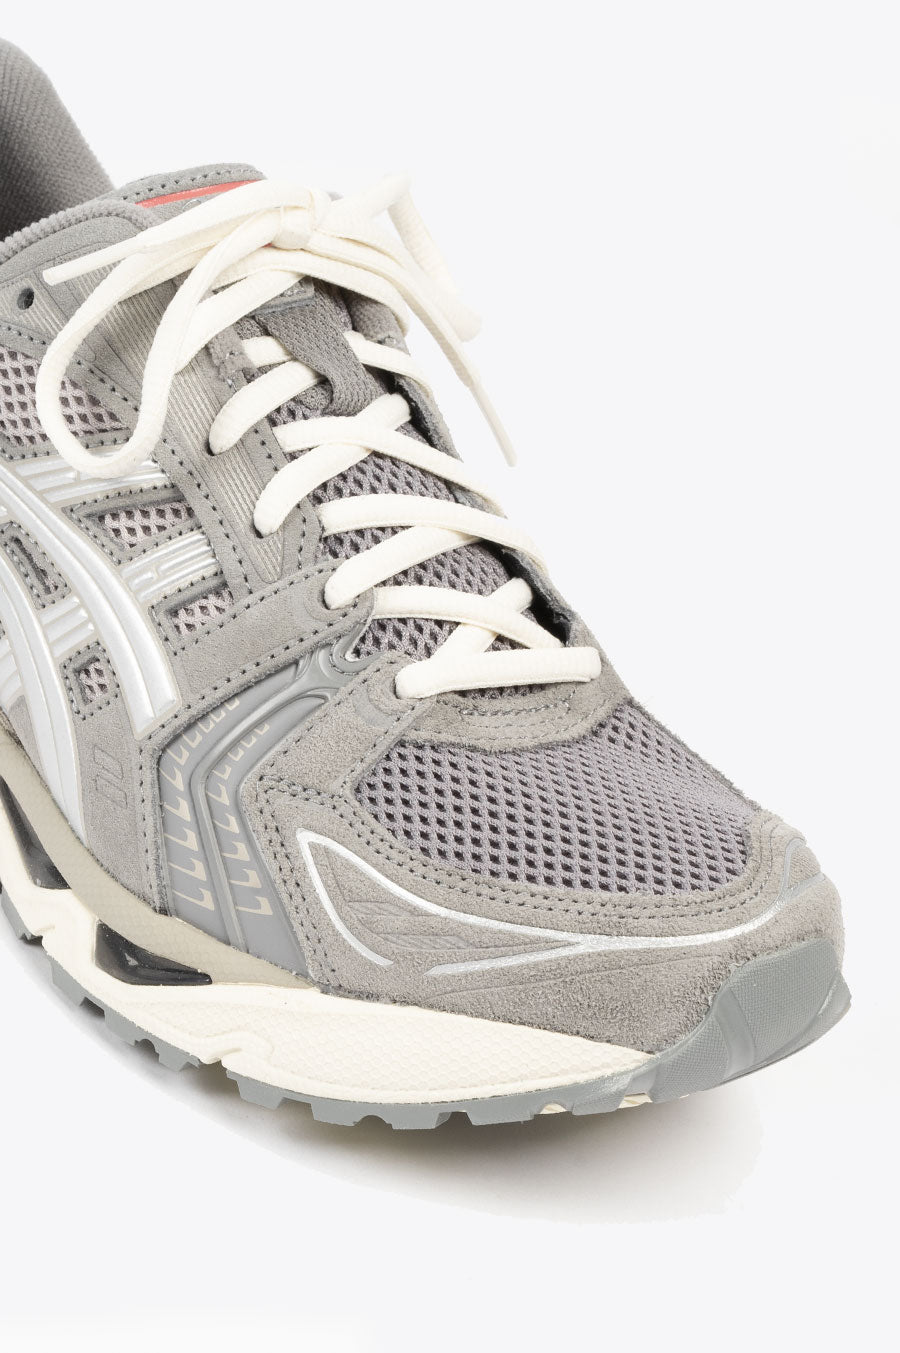 ASICS GEL-KAYANO 14 CLAY PURE SILVER – BLENDS